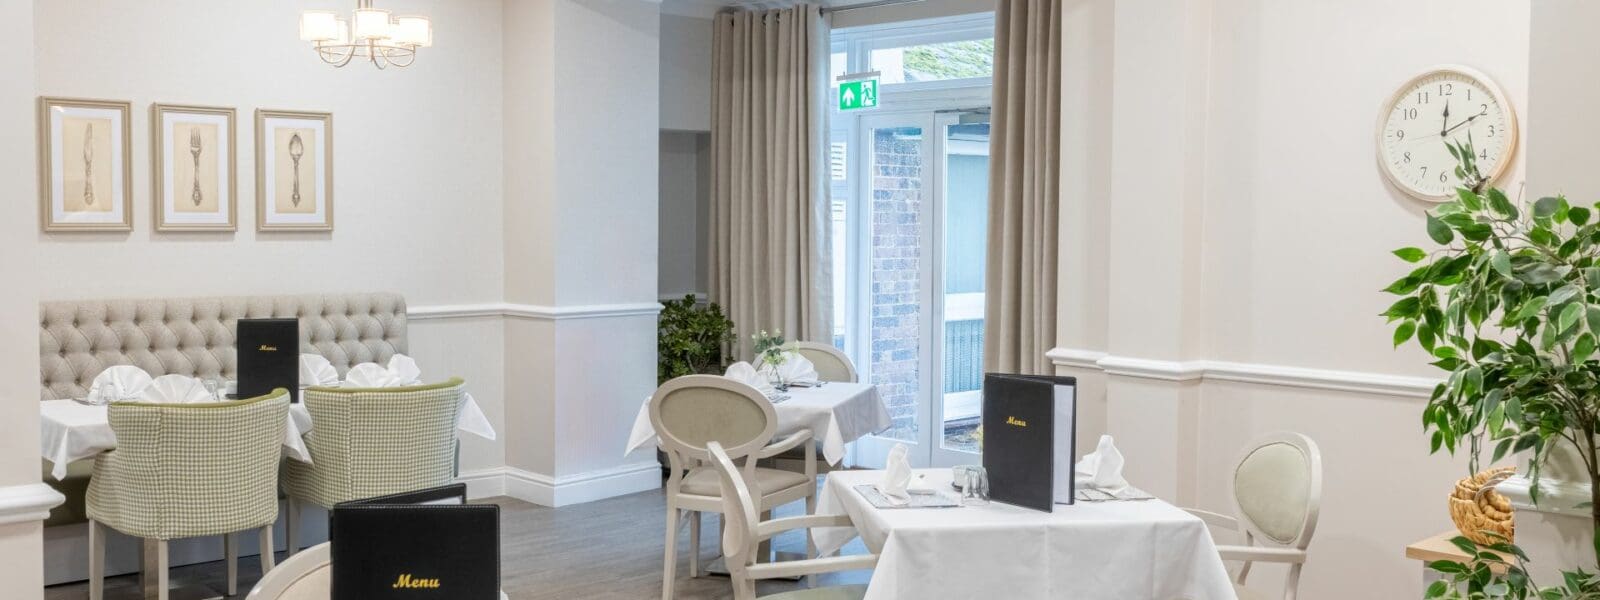 Walstead Place Care Home, newly refurbished dining room in November 2023